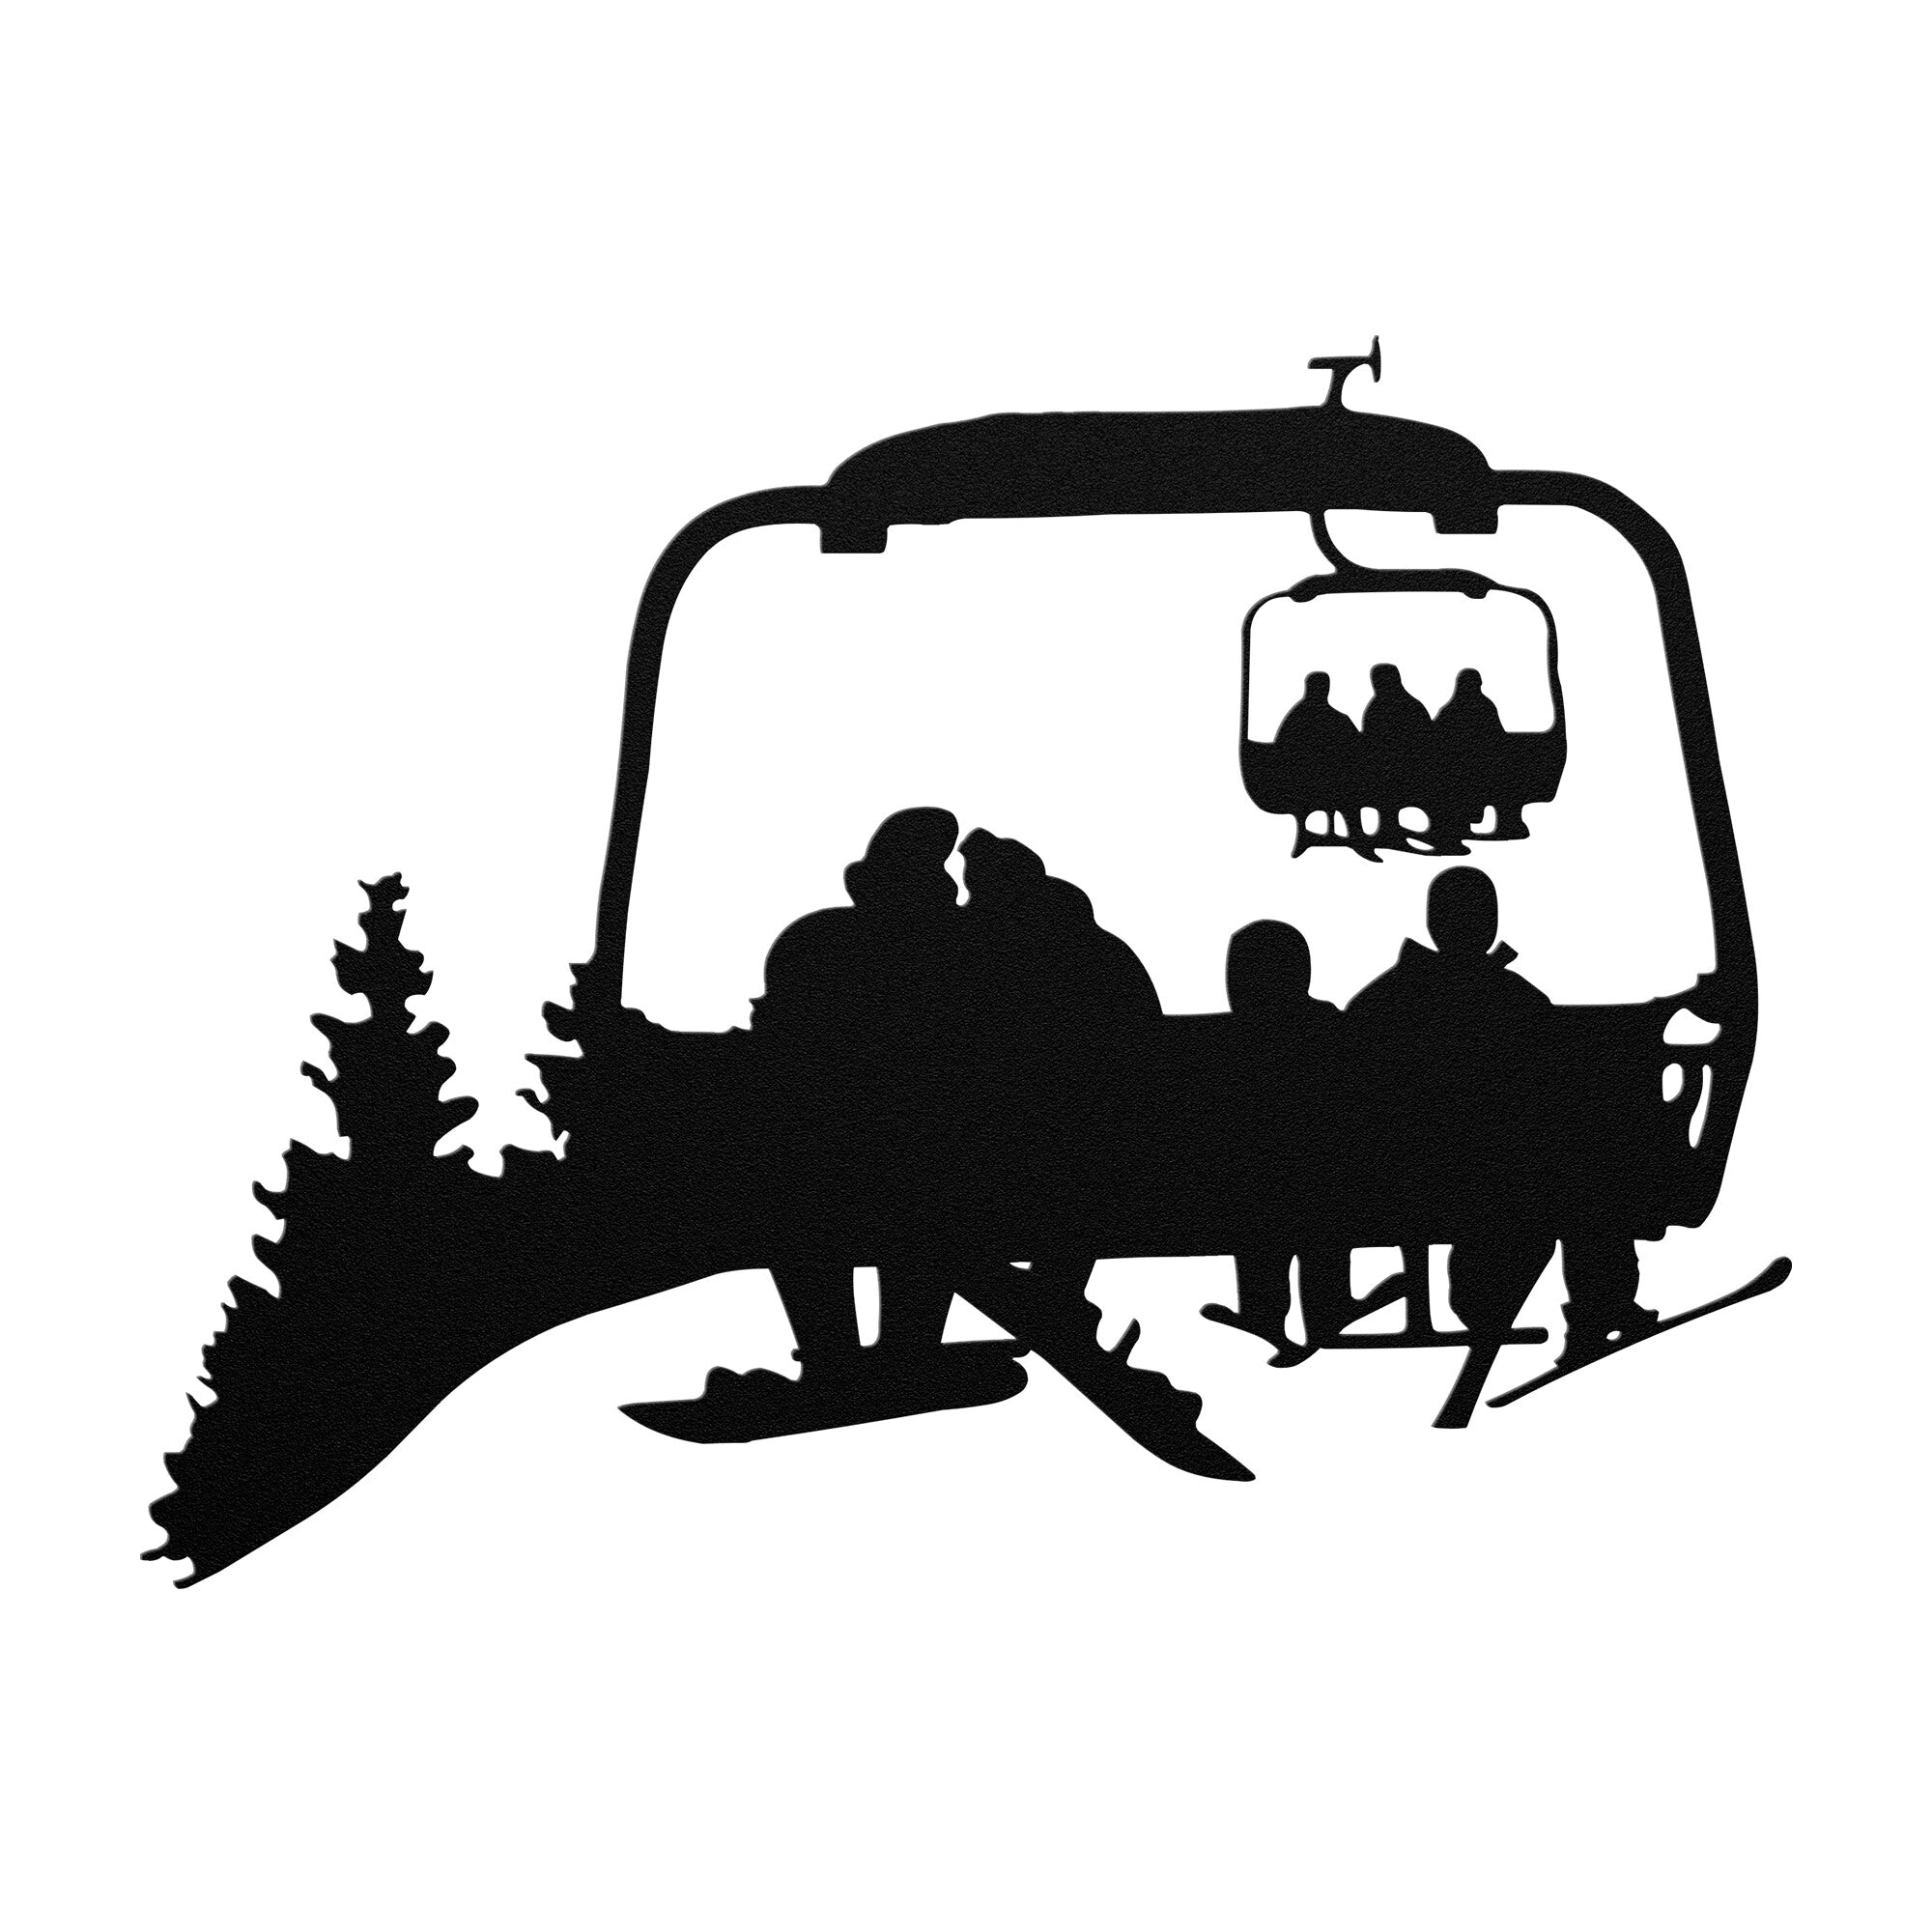 PERSONALIZED CHAIRLIFT SKI & SNOWBOARD FAMILY METAL WALL ART, 2 SNOWBOARDING PARENTS, 2 SKIING CHILDREN  (🇺🇸 MADE IN THE USA)